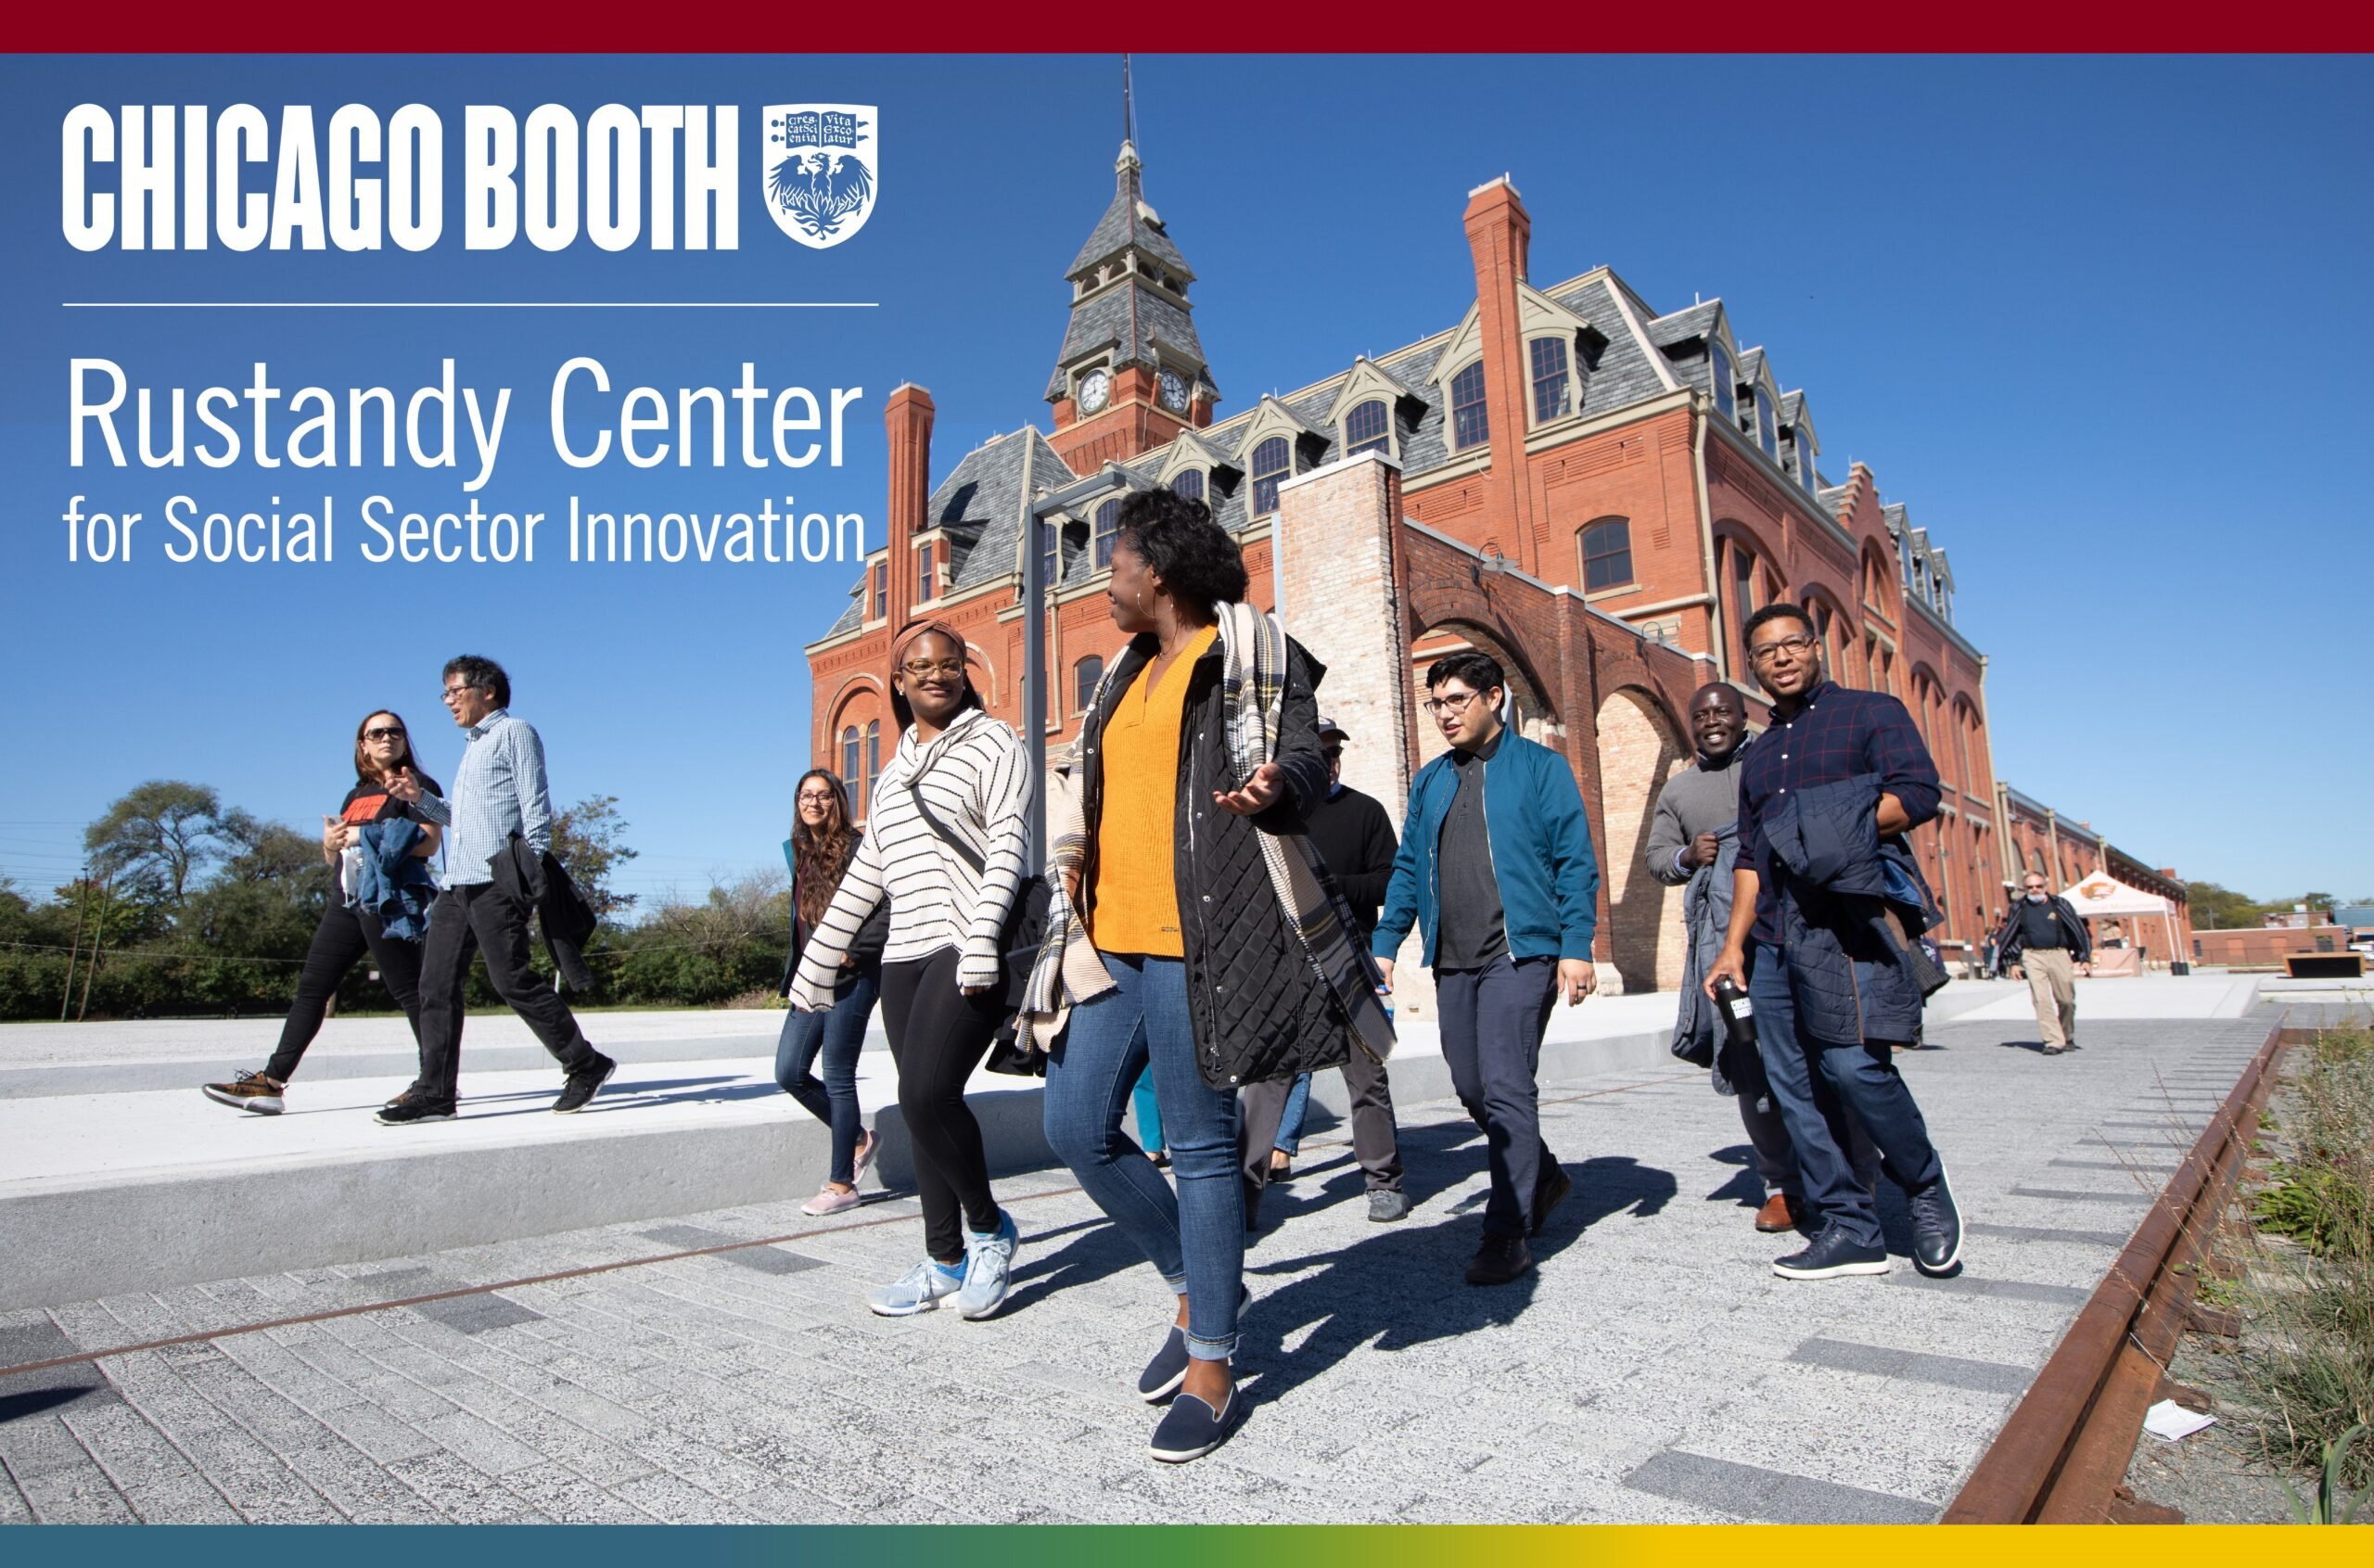 The Rustandy Center for Social Sector Innovation - Chicago Booth